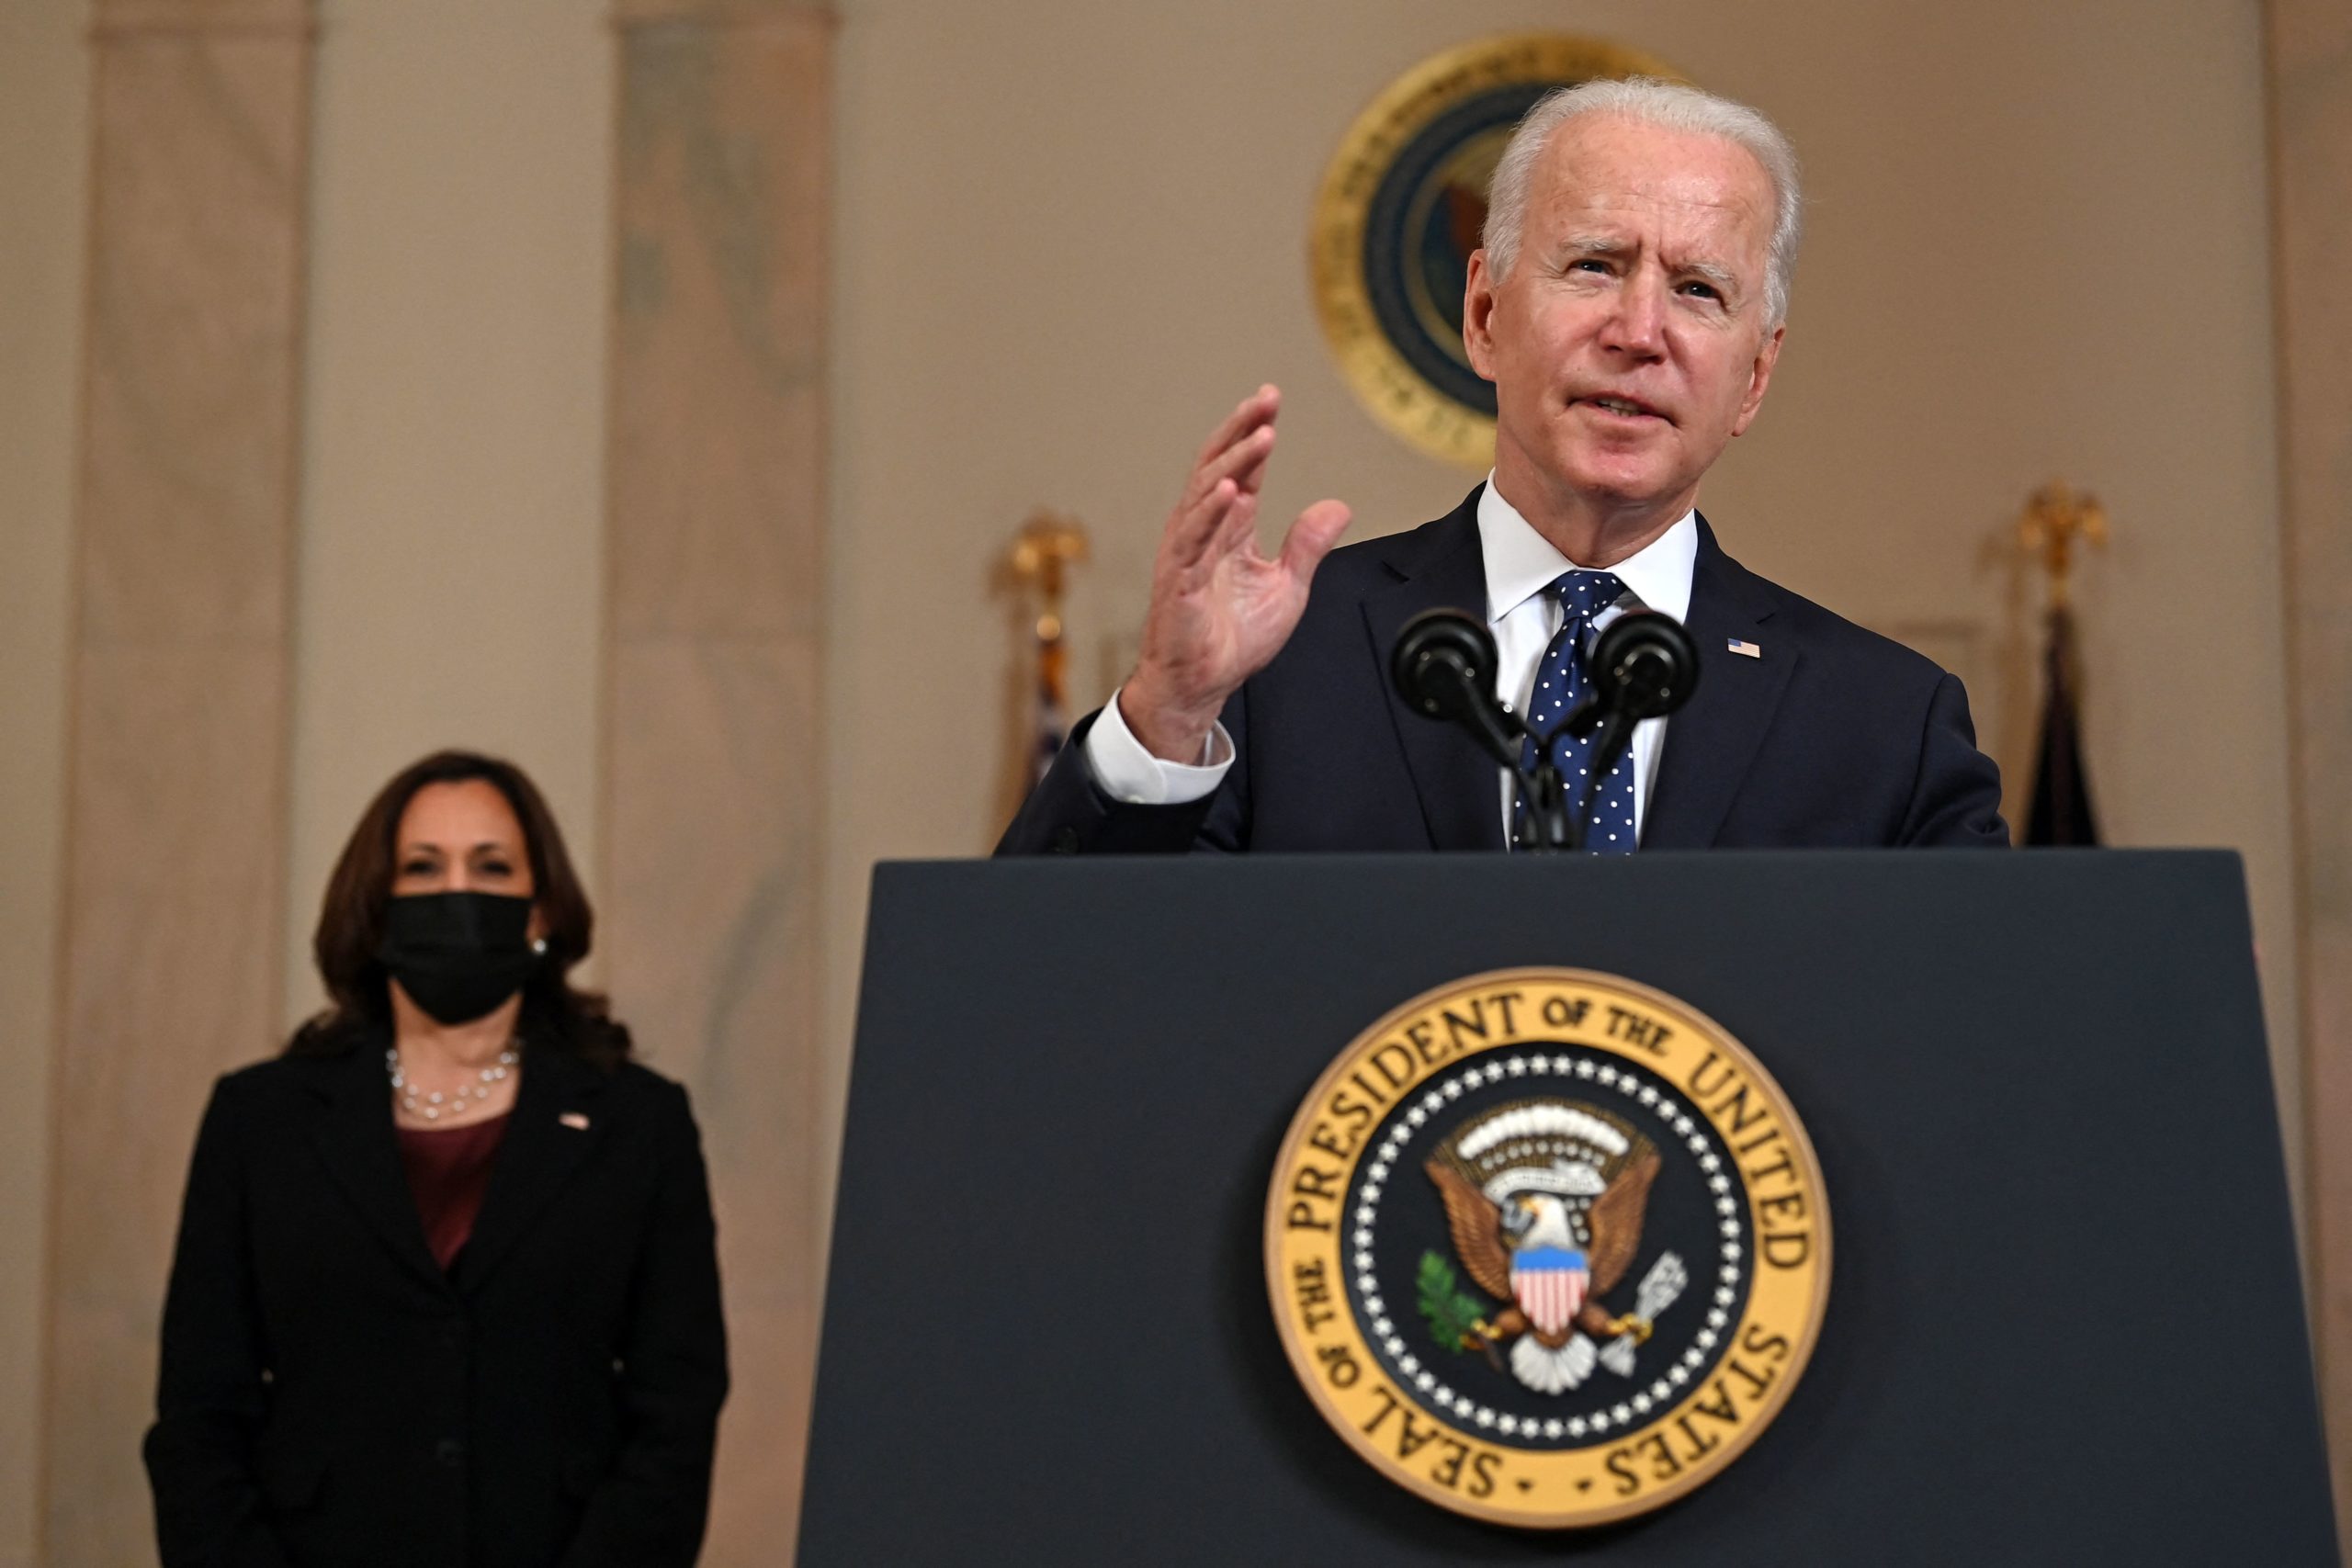 Vice President Kamala Harris (L) listens as US President Joe Biden delivers remarks on the guilty verdict against former policeman Derek Chauvin at the White House in Washington, DC, on April 20, 2021. - Derek Chauvin, a white former Minneapolis police officer, was convicted on April 20 of murdering African-American George Floyd after a racially charged trial that was seen as a pivotal test of police accountability in the United States. (Photo by BRENDAN SMIALOWSKI/AFP via Getty Images)